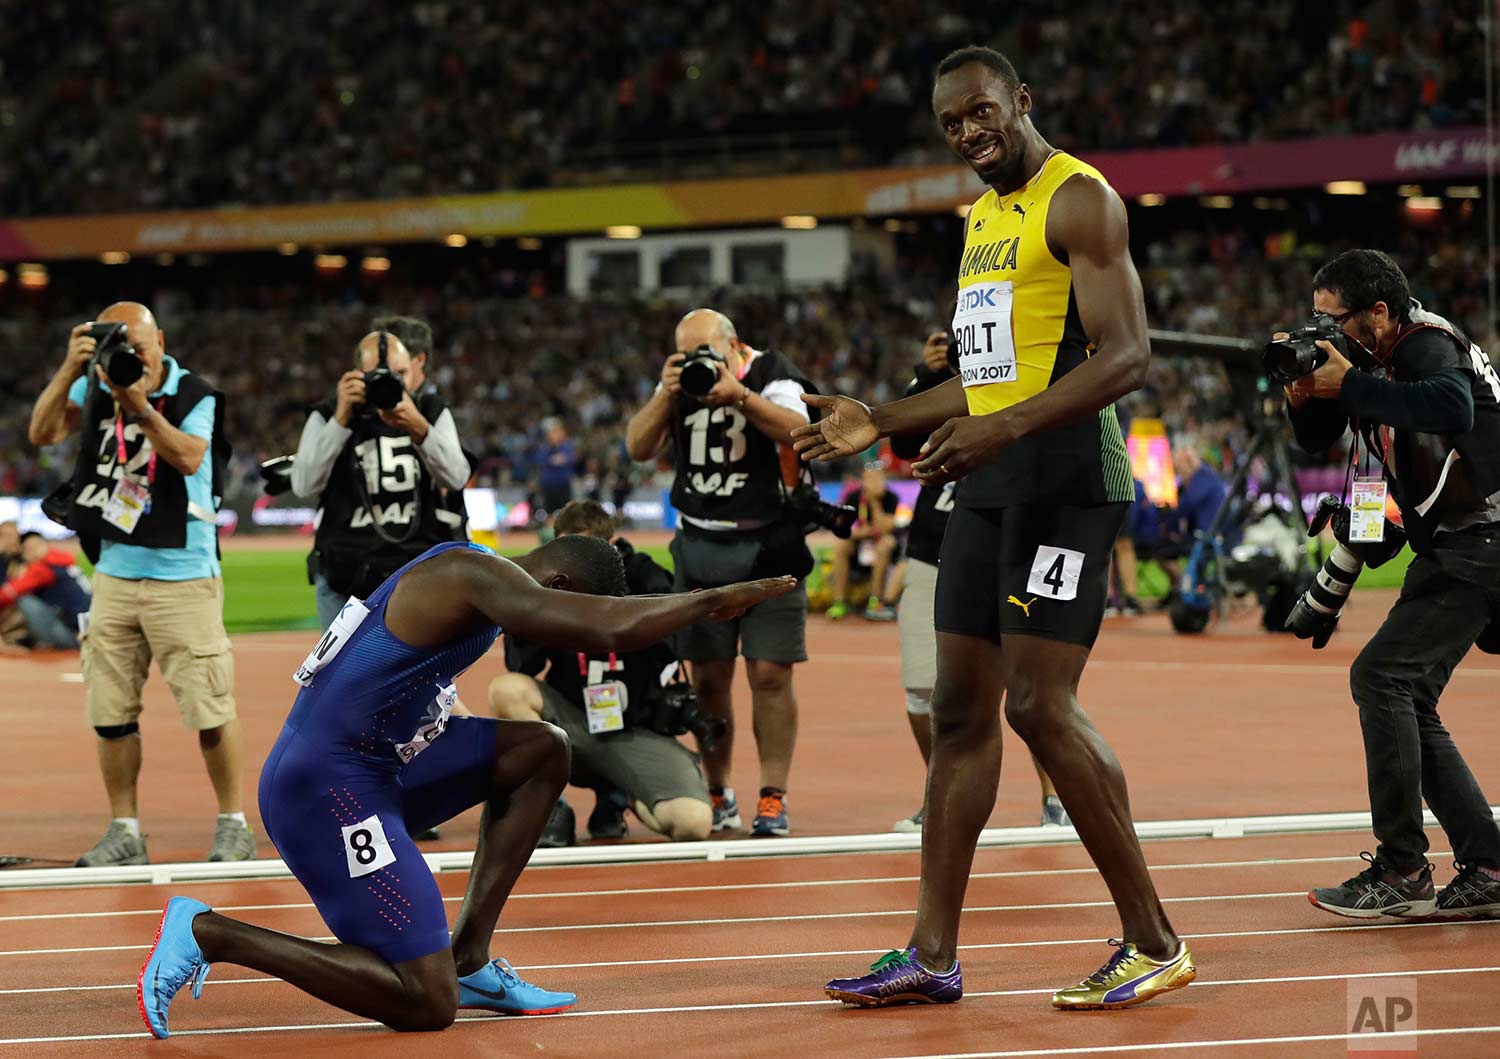  In this Saturday, Aug. 5, 2017 photo, United States' Justin Gatlin bows to Jamaica's Usain Bolt after winning the Men's 100 meters final during the World Athletics Championships in London. (AP Photo/Tim Ireland) 